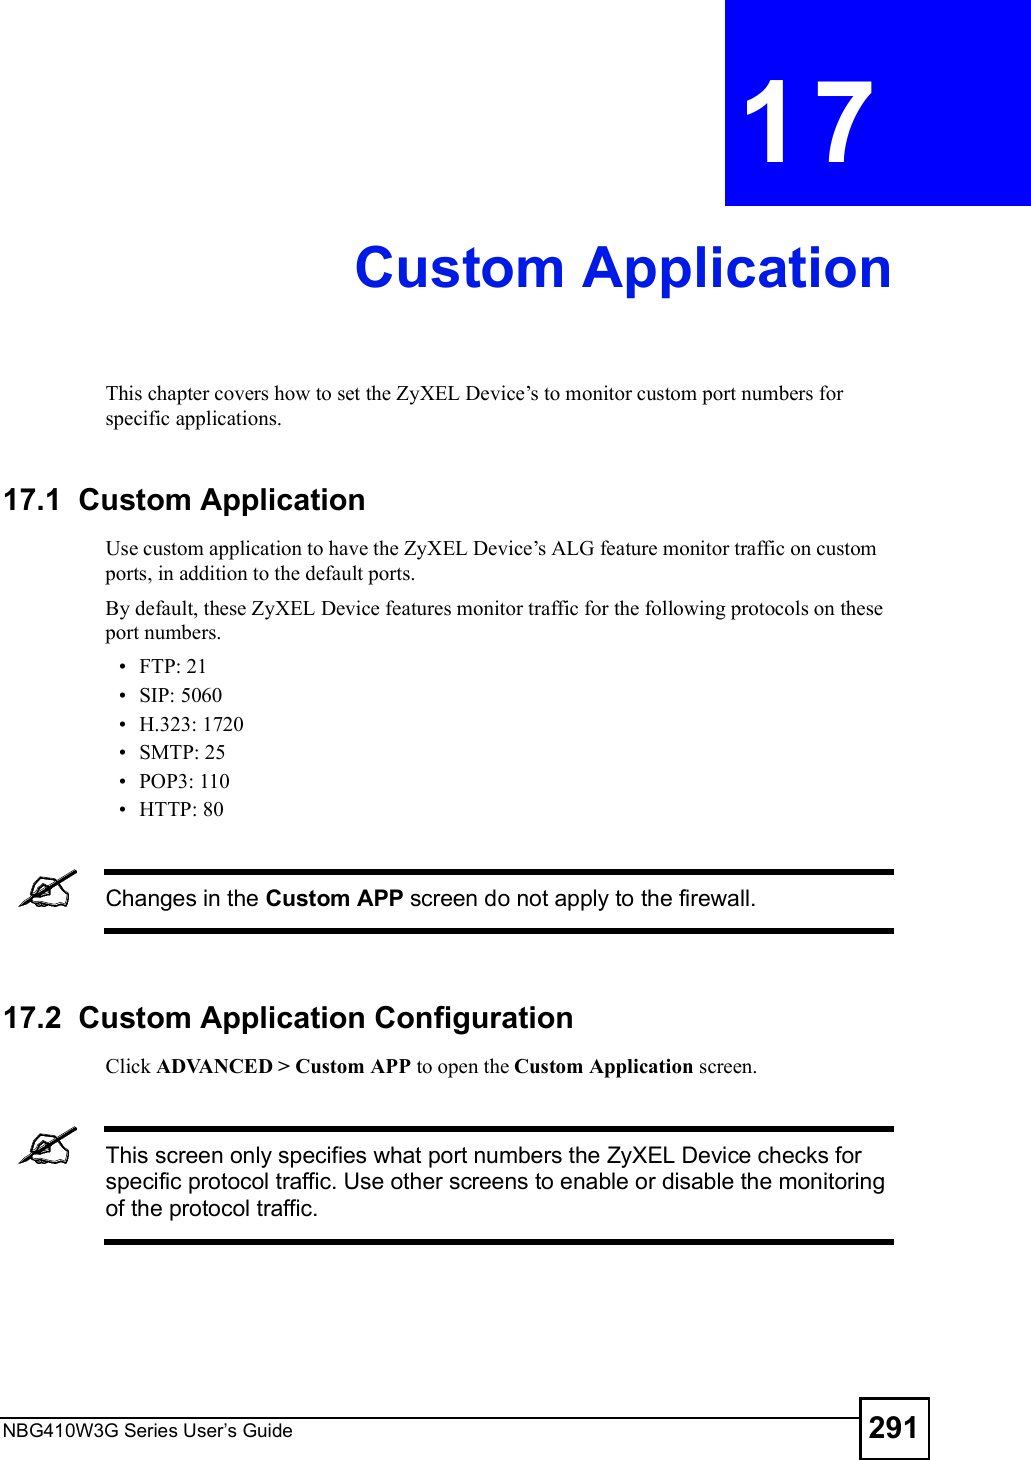 NBG410W3G Series User s Guide 291CHAPTER  17 Custom ApplicationThis chapter covers how to set the ZyXEL Device!s to monitor custom port numbers for specific applications. 17.1  Custom Application Use custom application to have the ZyXEL Device!s ALG feature monitor traffic on custom ports, in addition to the default ports. By default, these ZyXEL Device features monitor traffic for the following protocols on these port numbers. FTP: 21 SIP: 5060 H.323: 1720 SMTP: 25 POP3: 110 HTTP: 80Changes in the Custom APP screen do not apply to the firewall.17.2  Custom Application Configuration Click ADVANCED &gt; Custom APP to open the Custom Application screen. This screen only specifies what port numbers the ZyXEL Device checks for specific protocol traffic. Use other screens to enable or disable the monitoring of the protocol traffic. 